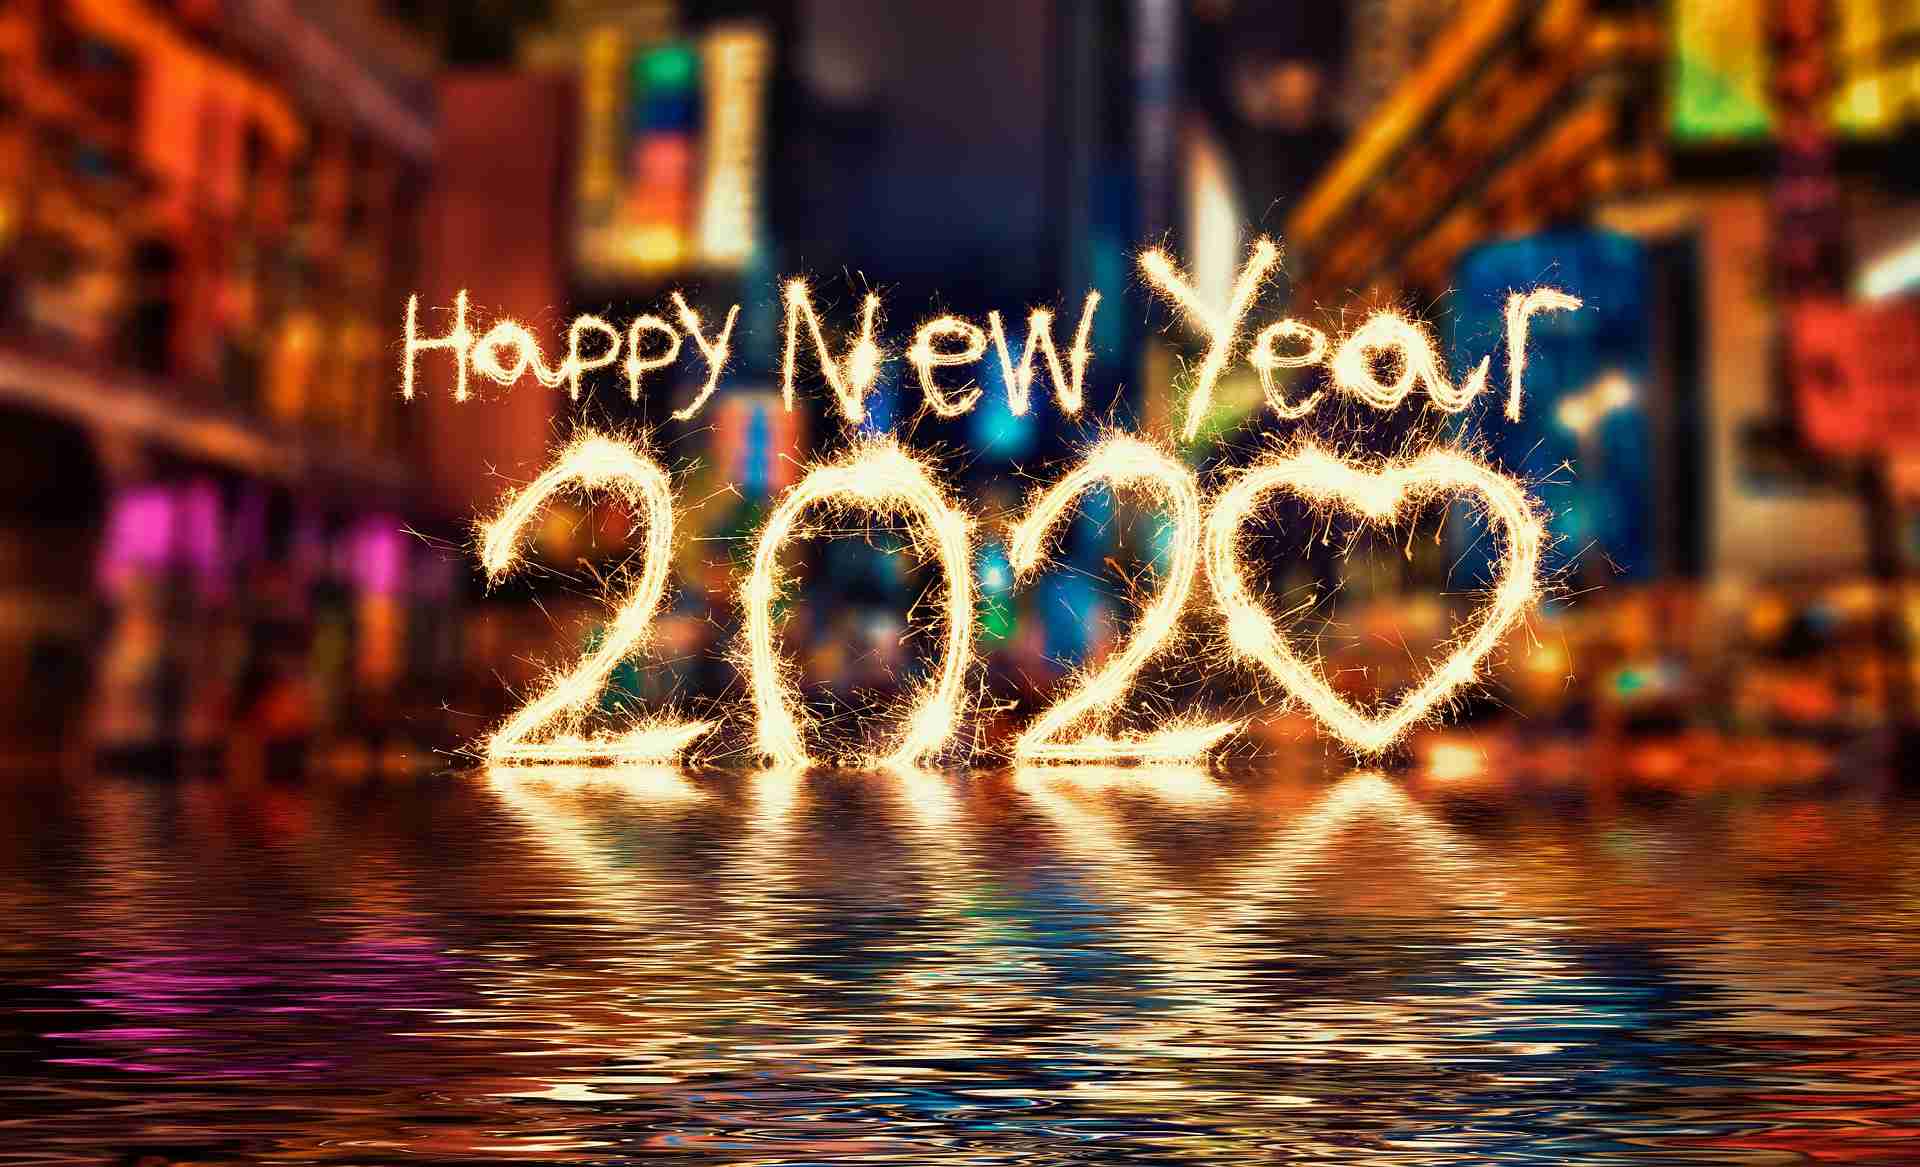 BEST】Happy New Year 2020 HD Wallpaper & Image Download Free